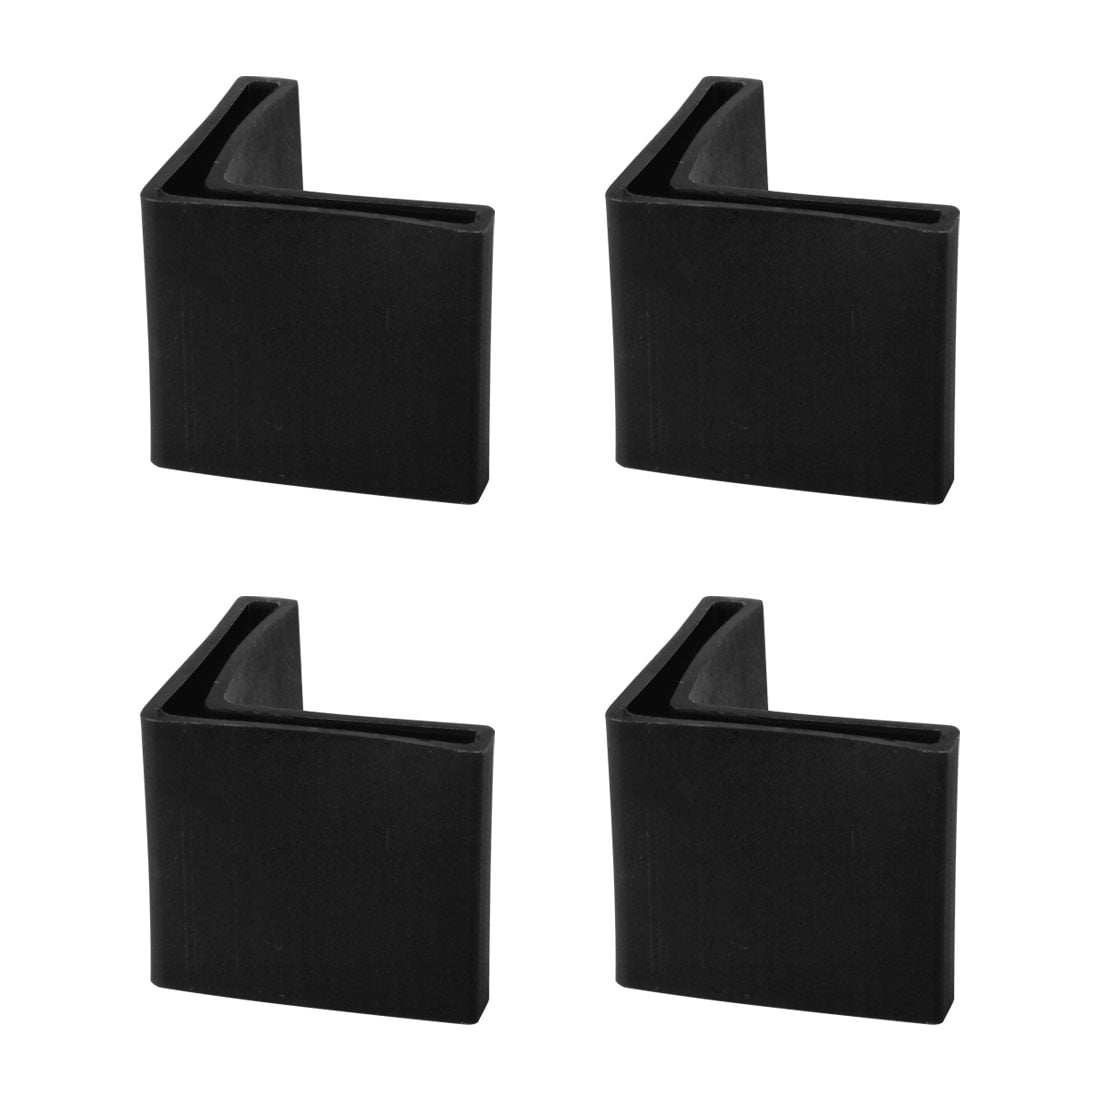 Sourcingmap 40mm x 40mm 10 Pcs L Shaped Rubber Covers Furniture Angle Iron Foot 